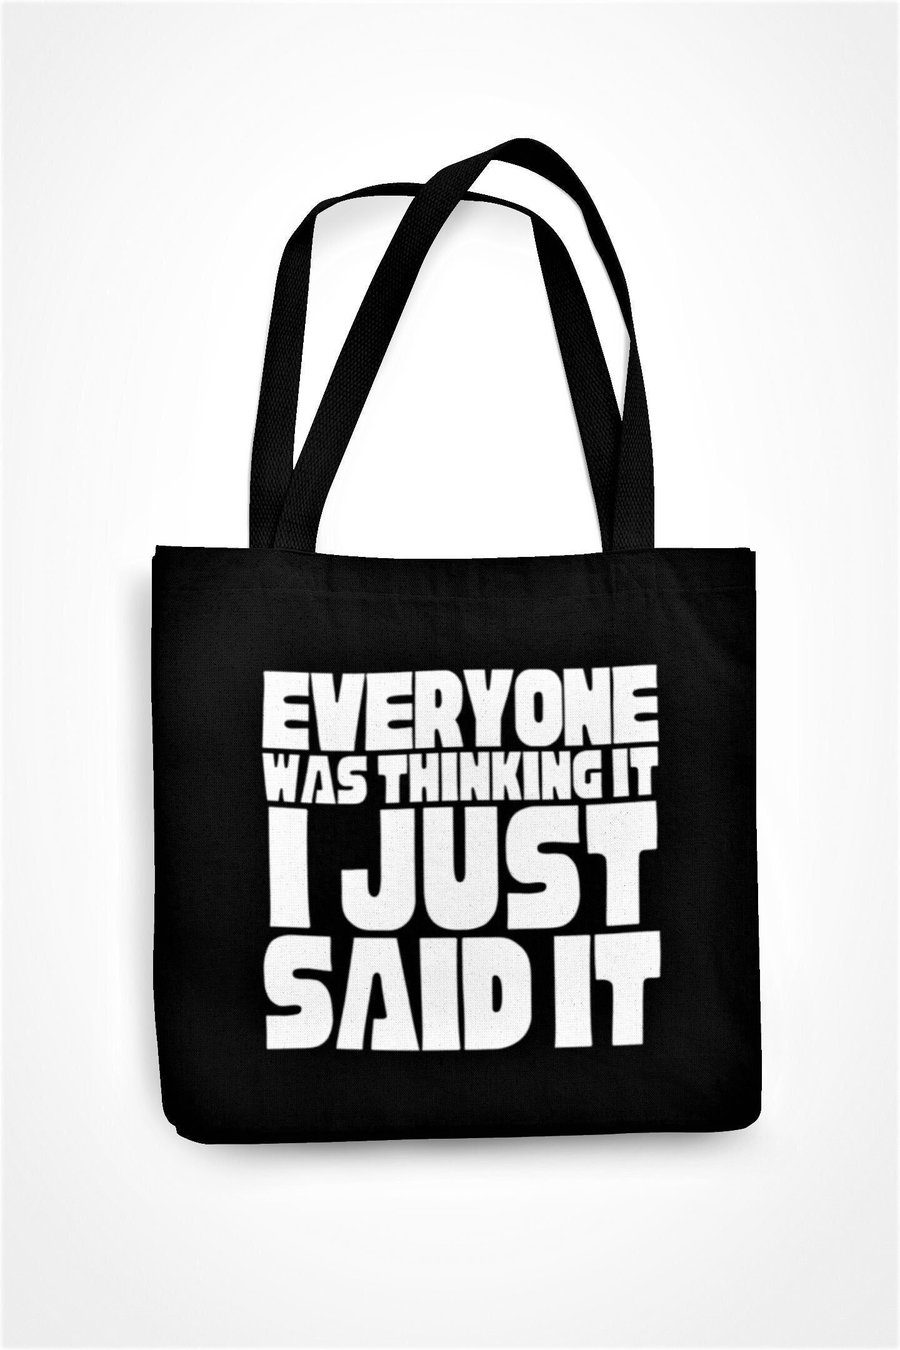 Everyone Was Thinking It I Just Said It Tote Bag Funny Sarcastic Loud Person